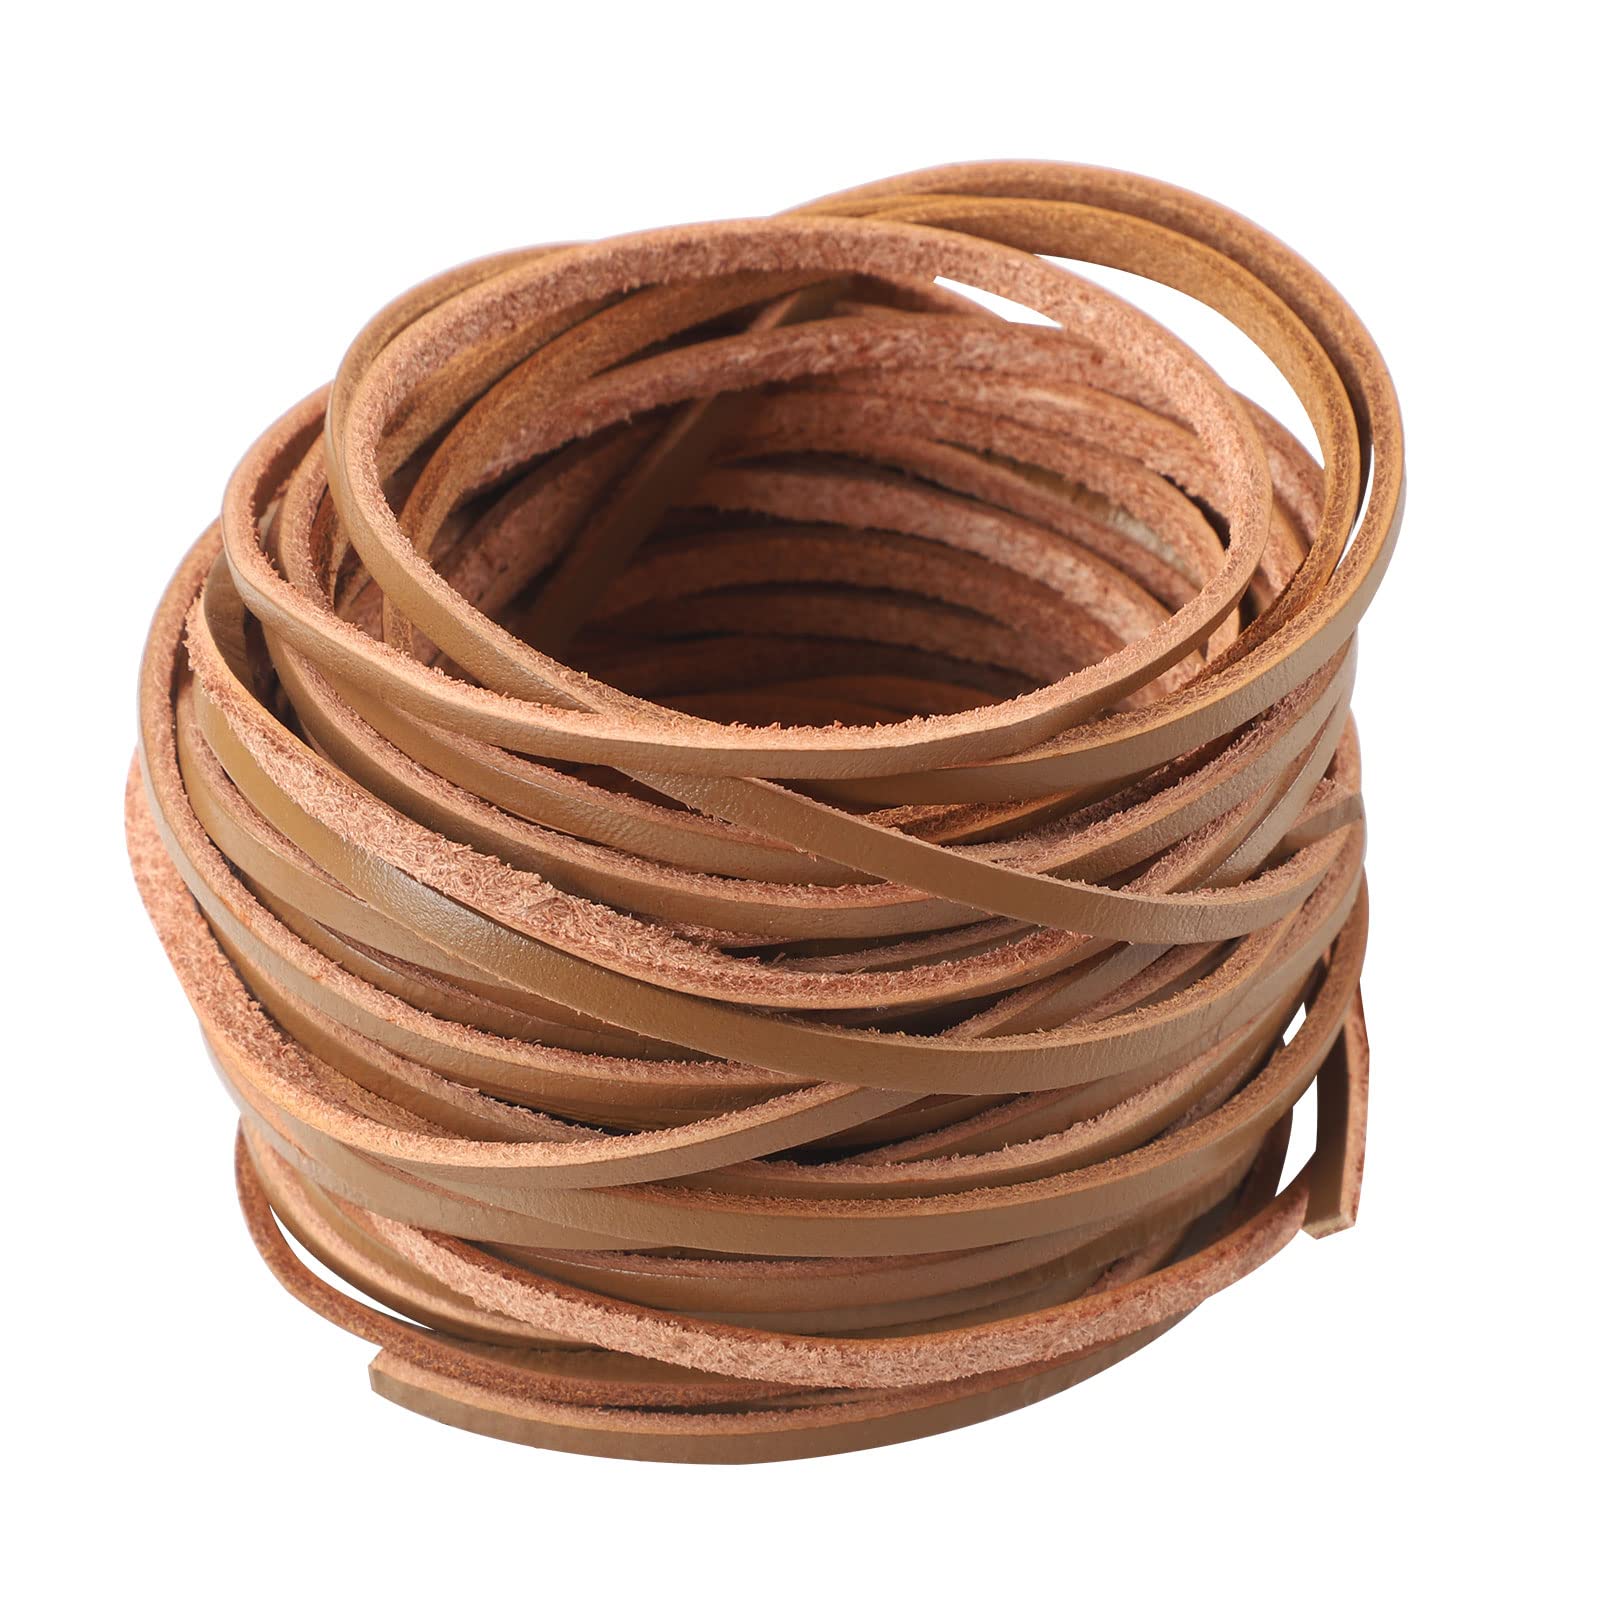 Picheng 3mm Flat Genuine Leather Cord, 5Yards Strip Cord Braiding String  Very Suitable for Jewelry Making, Leather Shoe Lace, Garden  Tools,Toys,Woven Bags,DIY Crafts Projects (Light Brown)